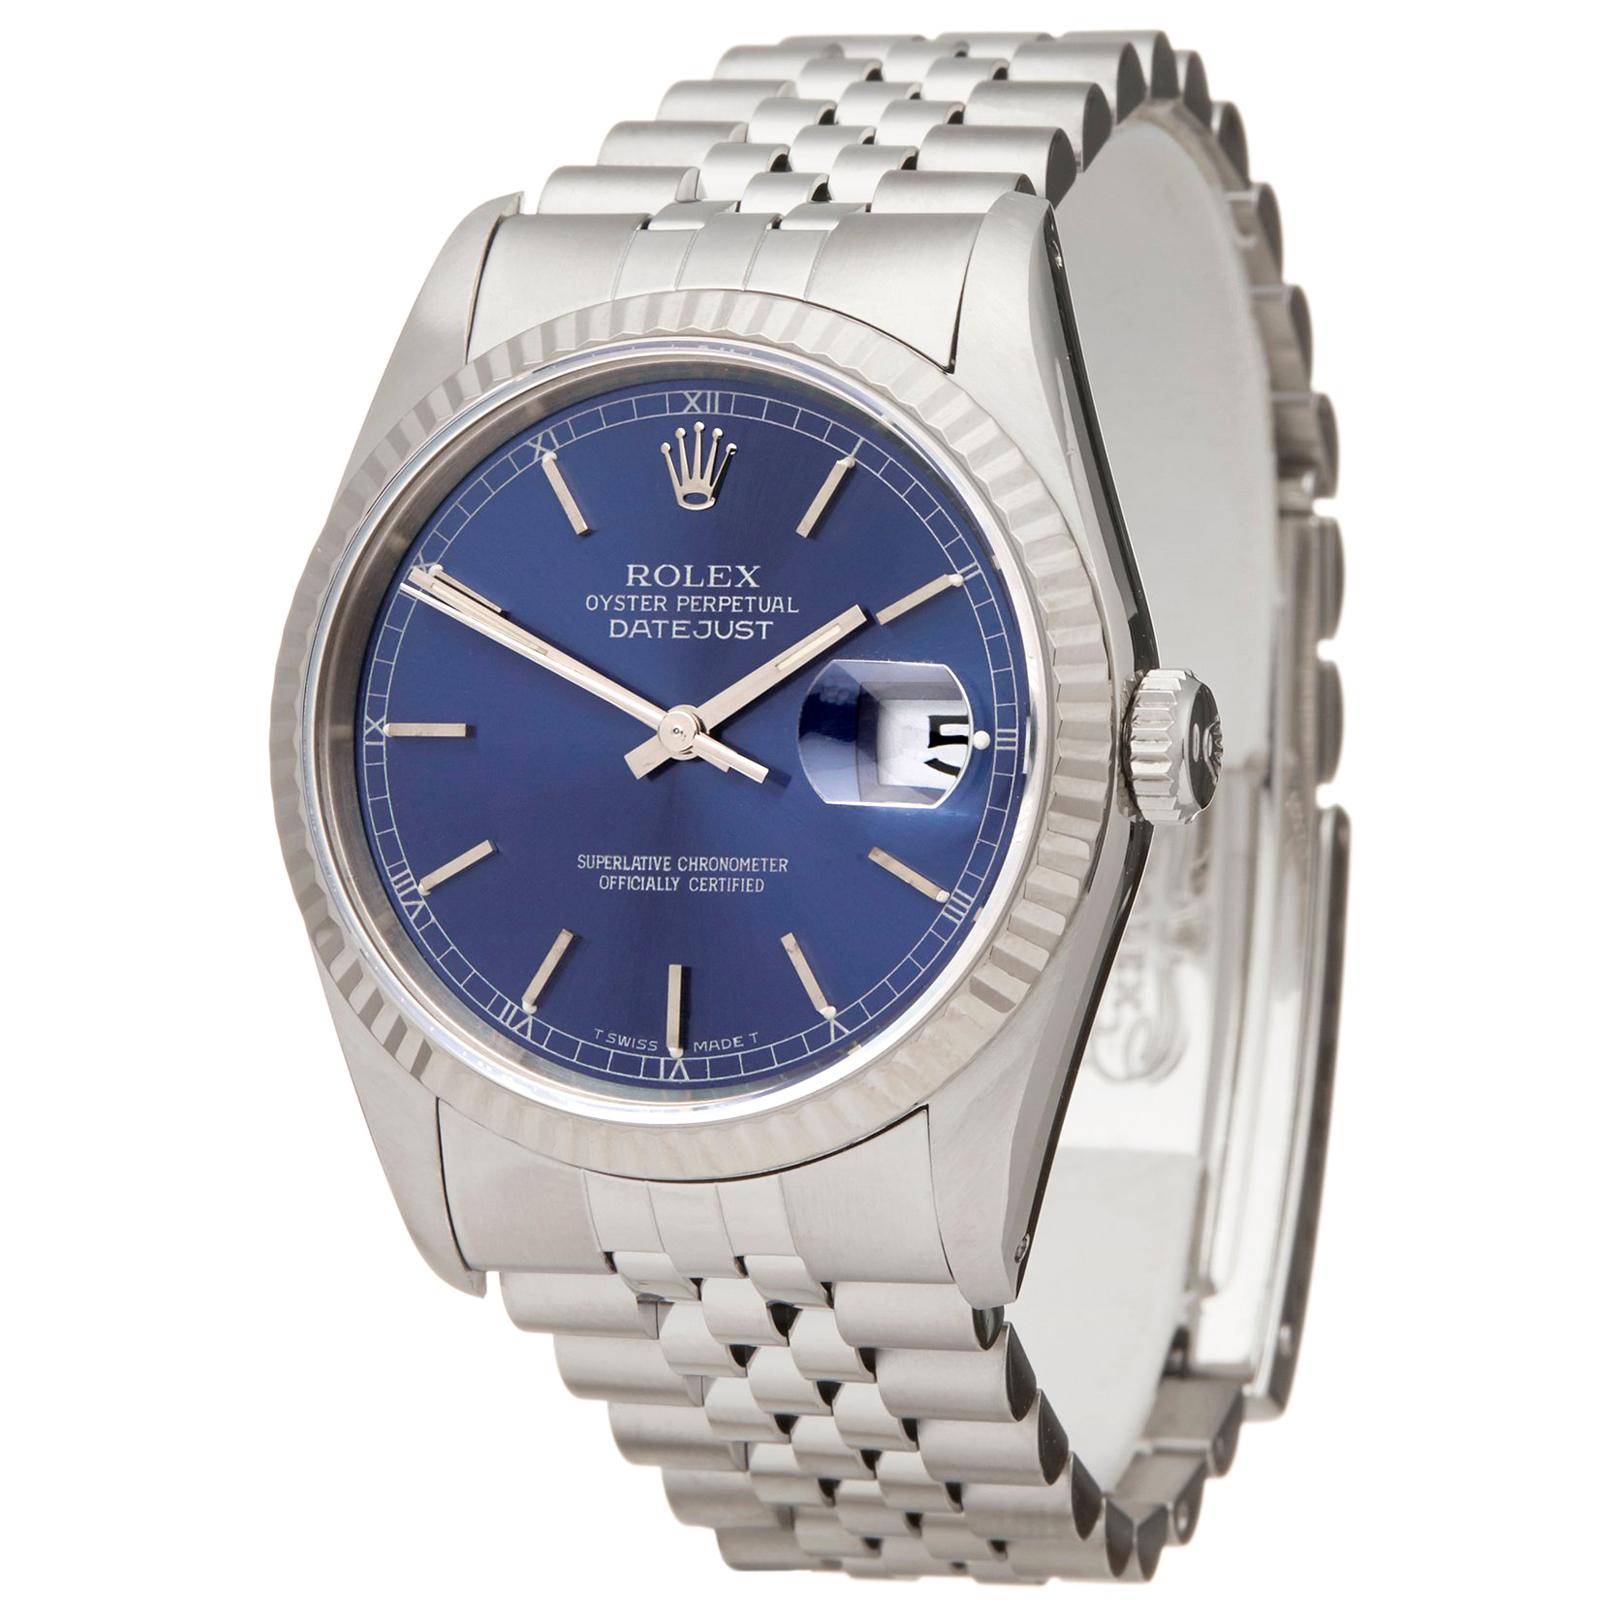 Reference: W5966
Manufacturer: Rolex
Model: Datejust
Model Reference: 16234
Age: 1st January 1991
Age: Unisex
Box and Papers: Box and Guarantee Only
Dial: Blue Baton
Glass: Sapphire Crystal
Movement: Automatic
Water Resistance: To Manufacturers